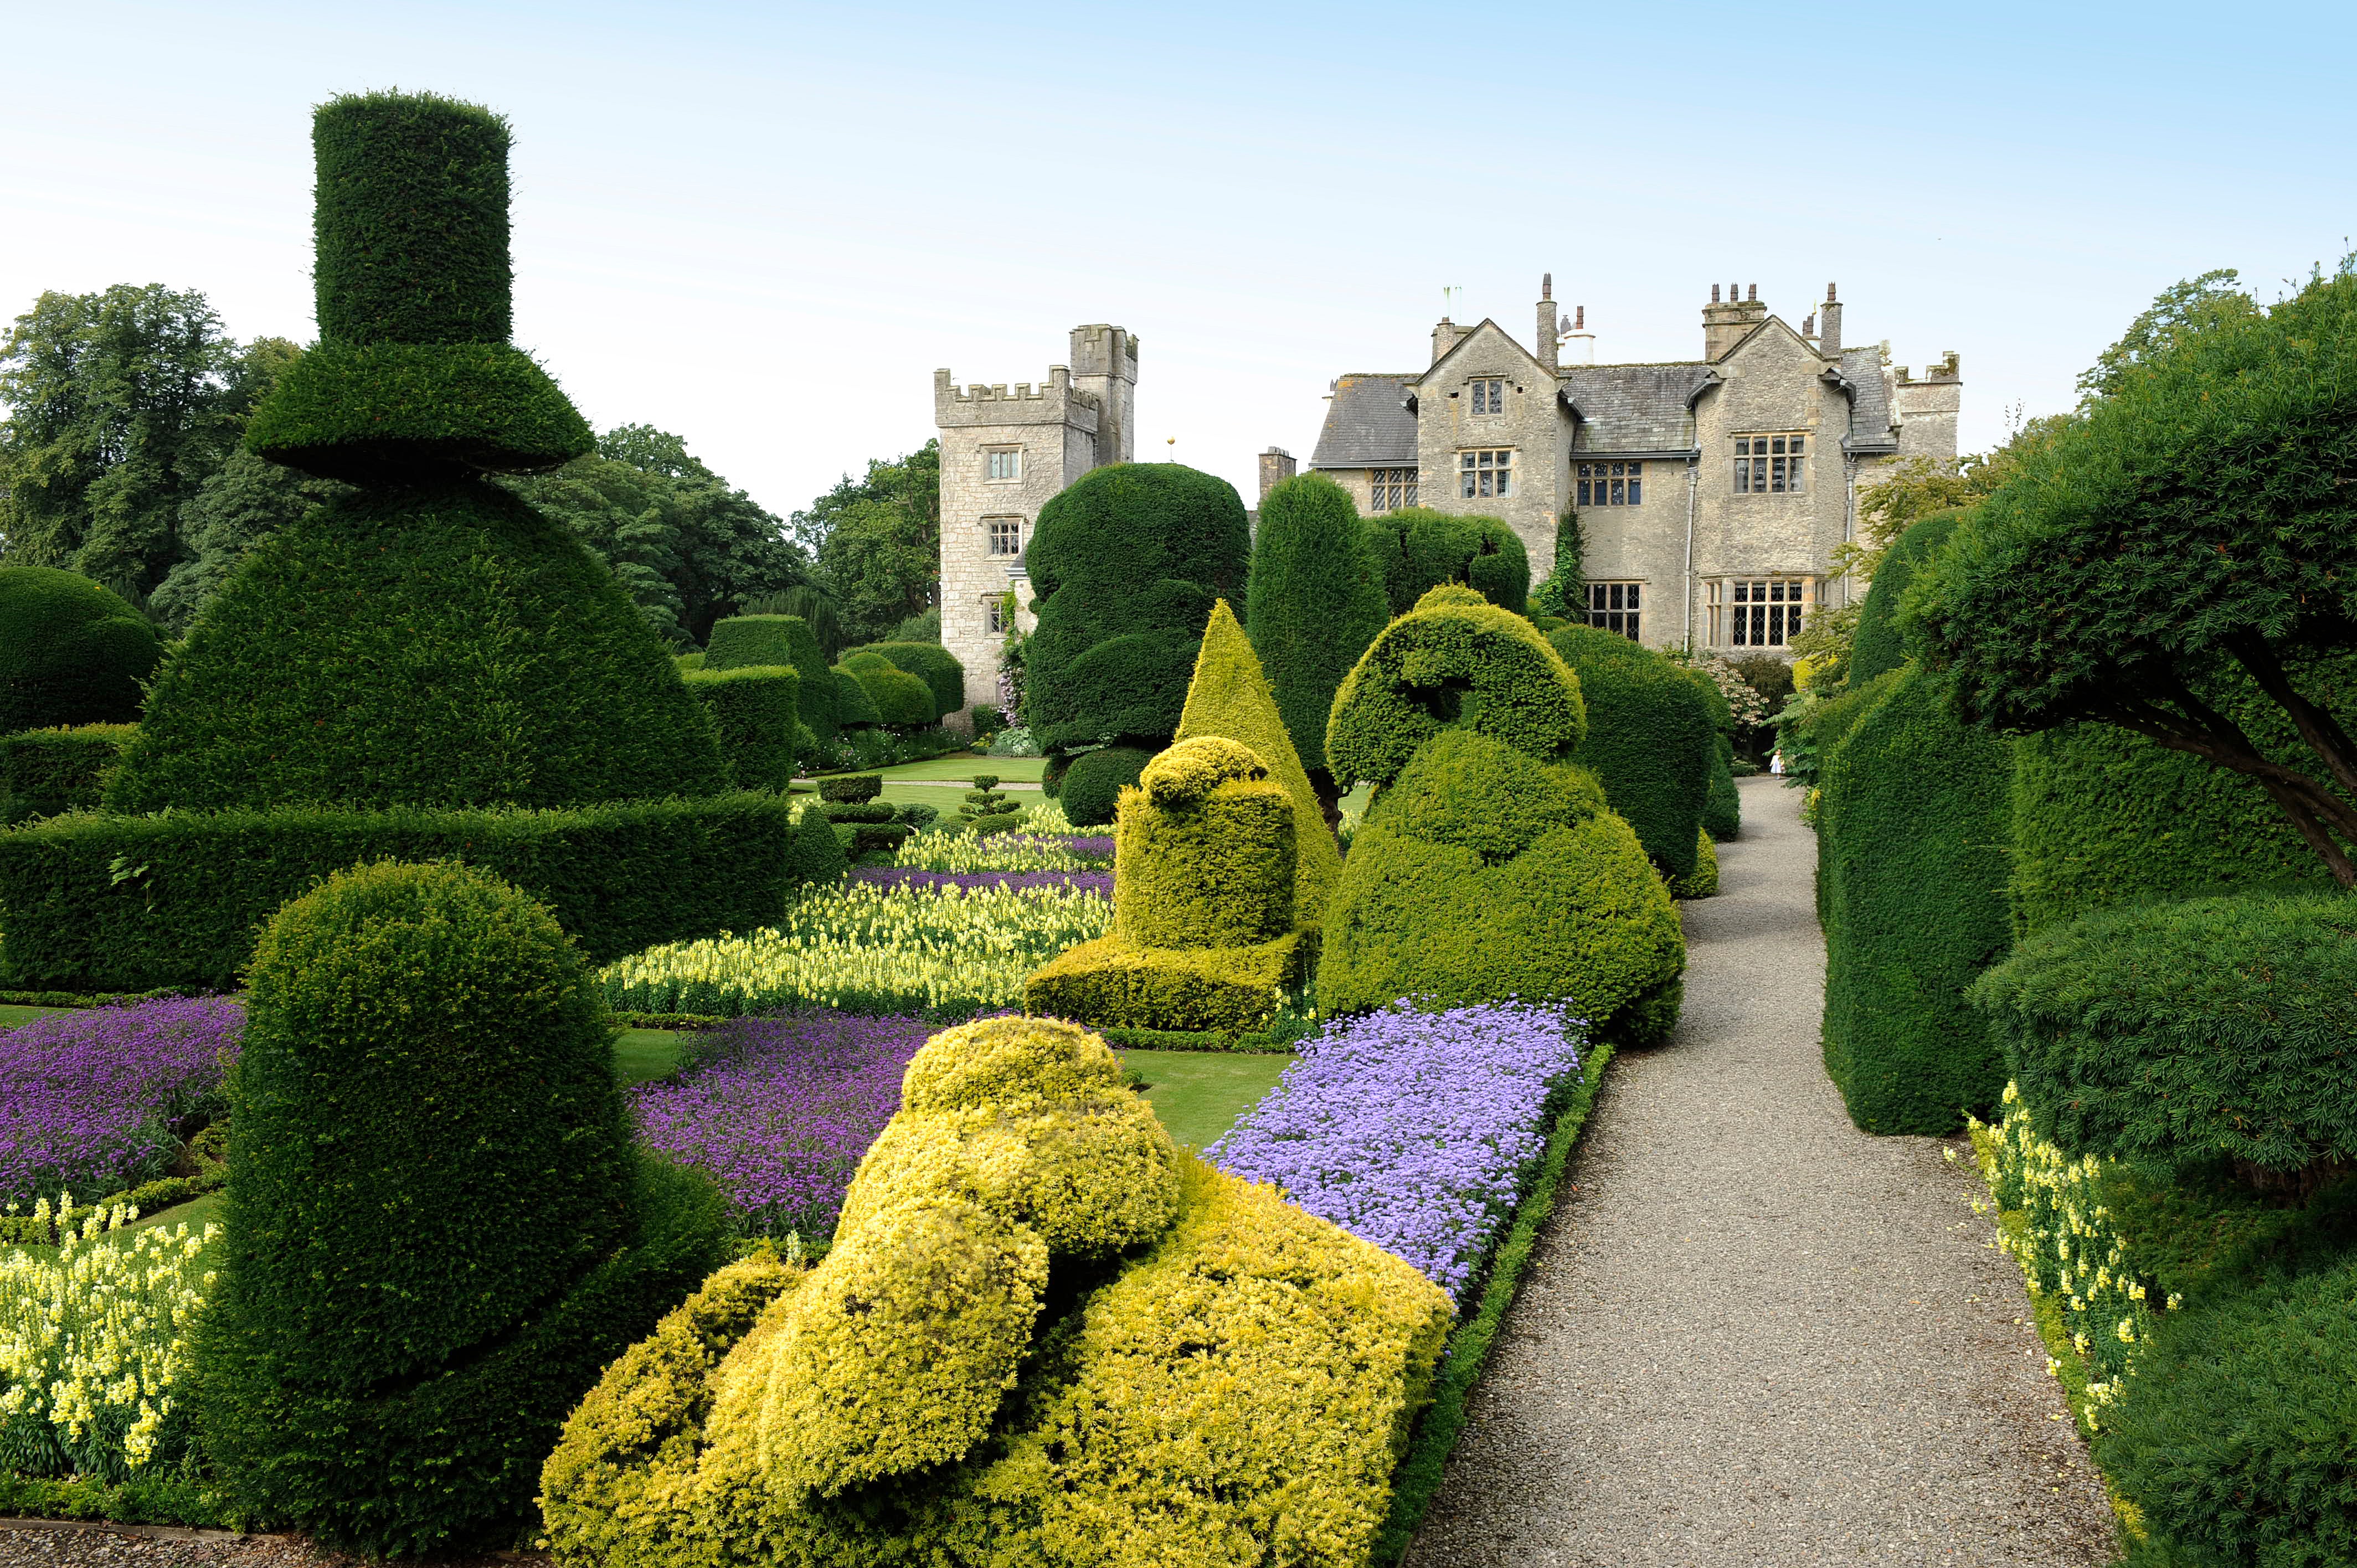 The topiary at Levens Hall would make even Edward Scissorhands green with envy